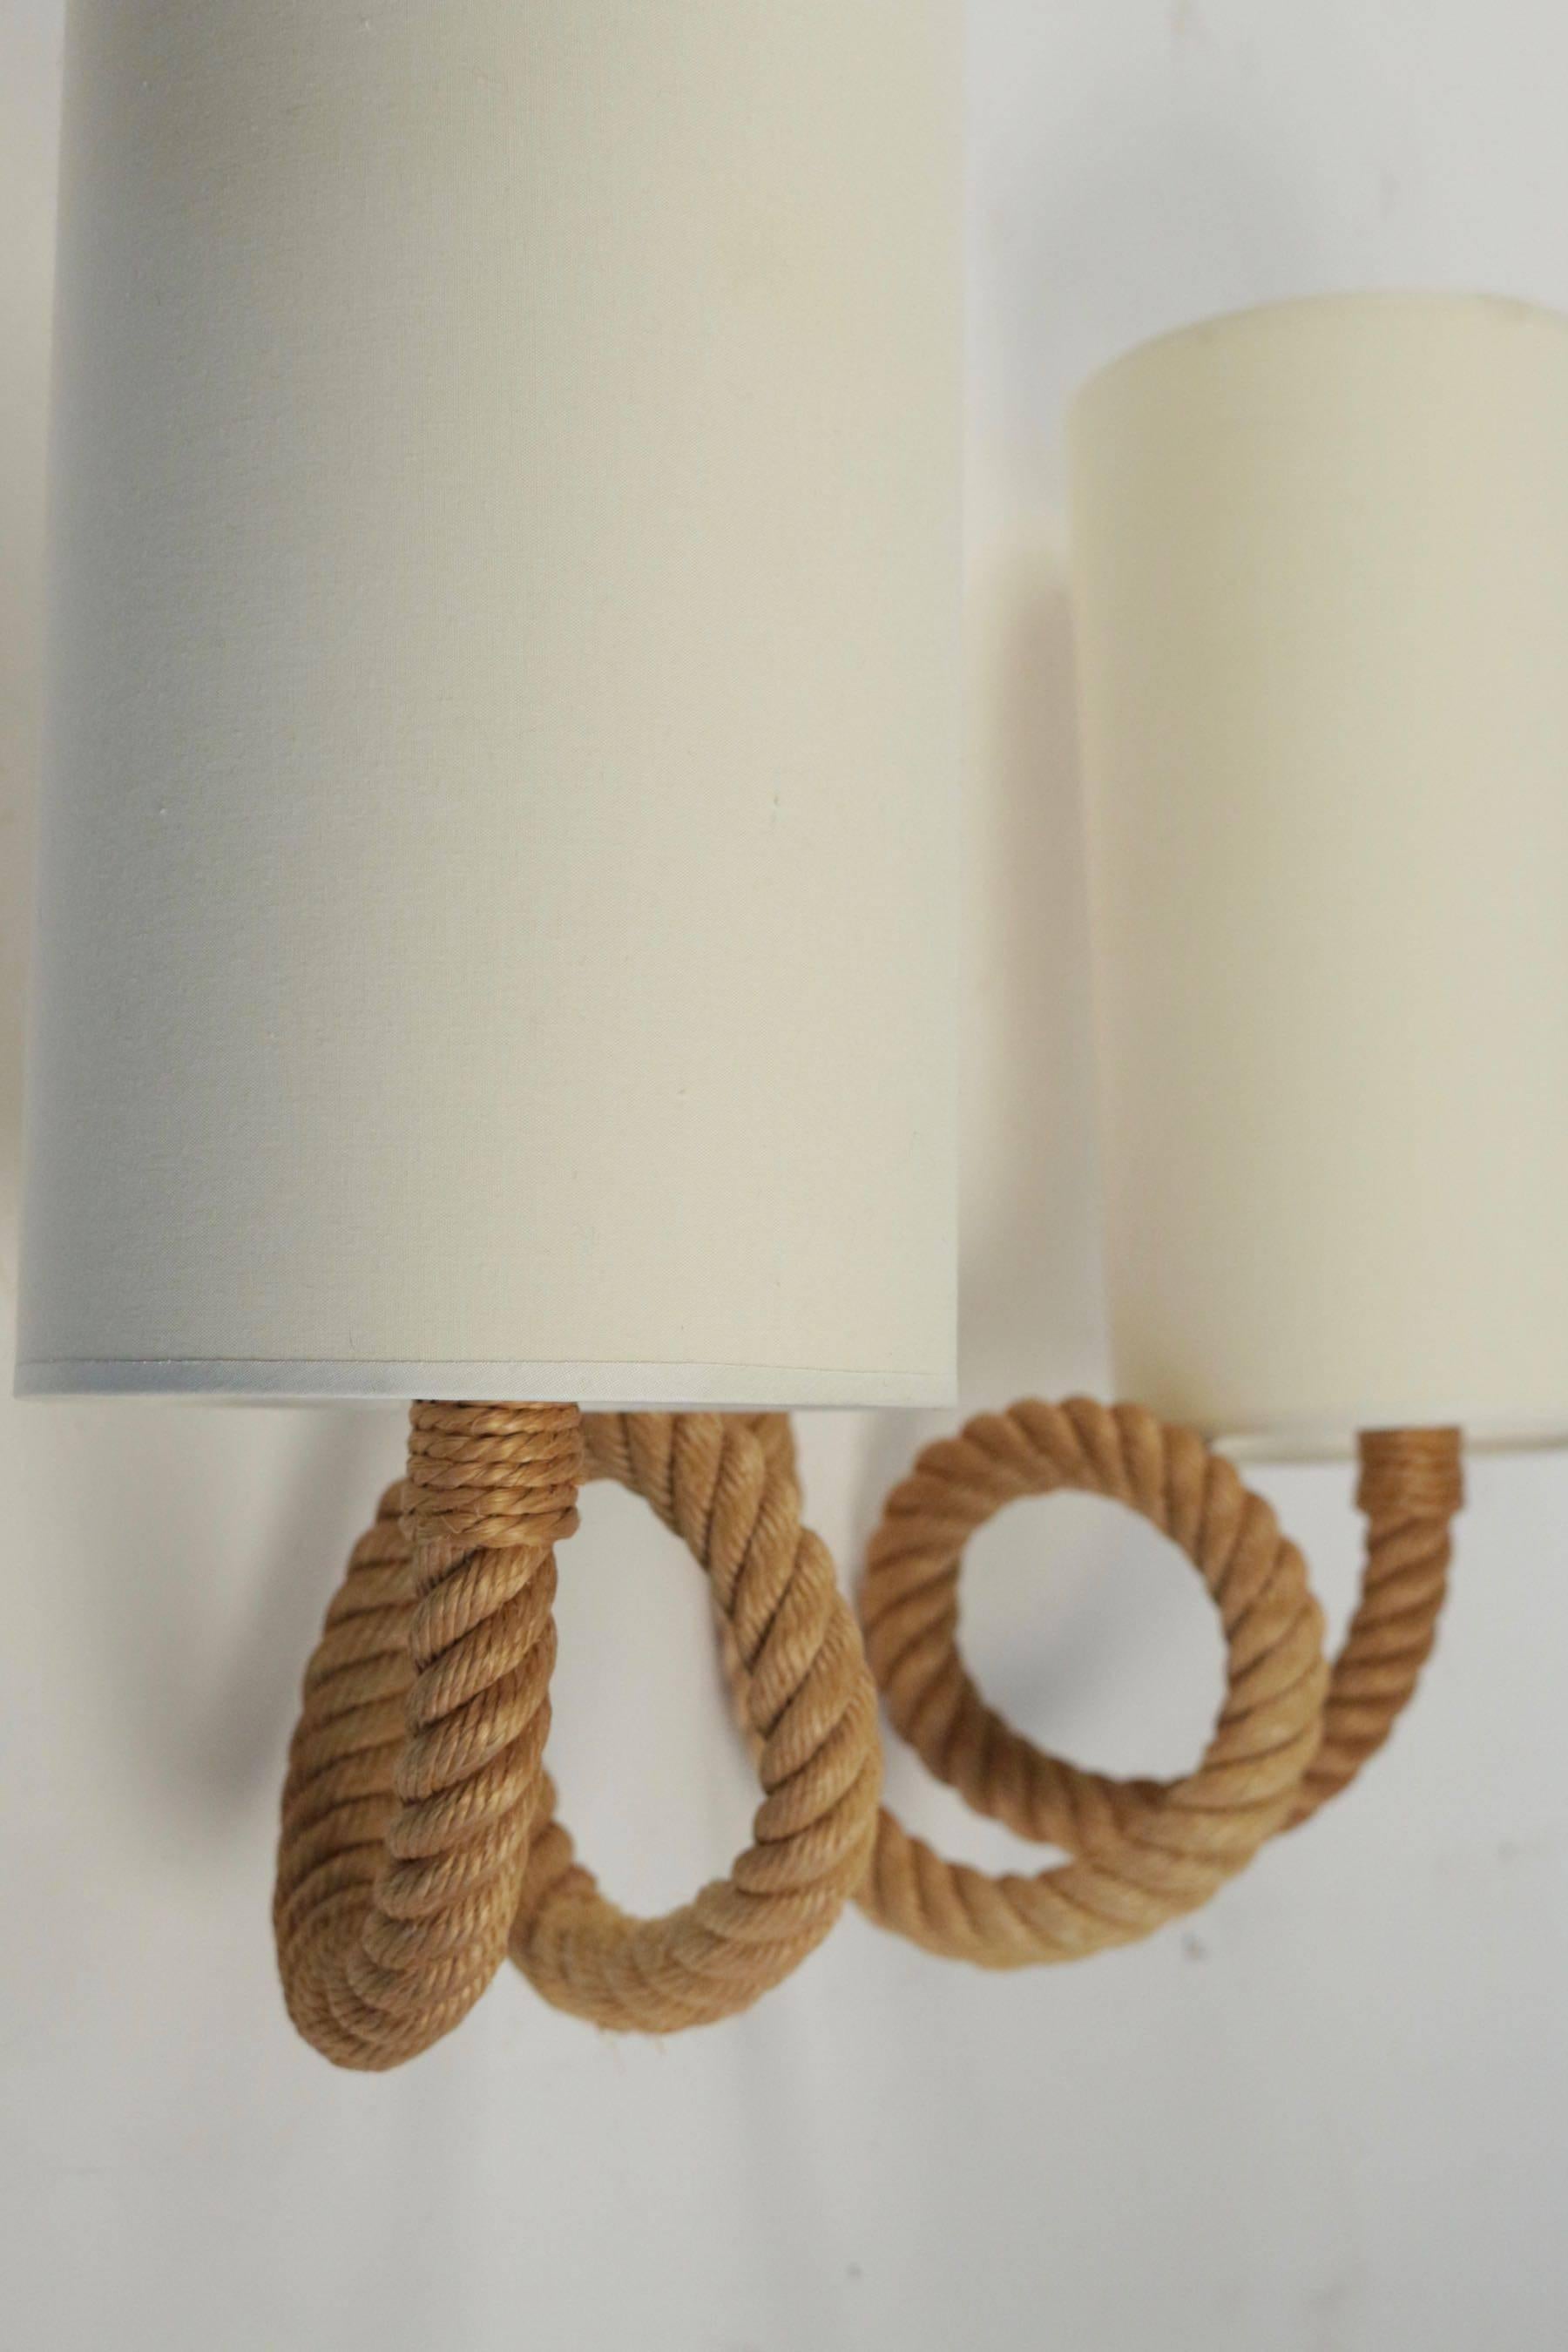 1950s large pair of Audoux and Minet sconces.

Two rope arms are ended with cylindrical lampshades made of off-white cotton. 
The arms form a rope buckle which allow to hang up the sconces to the wall.